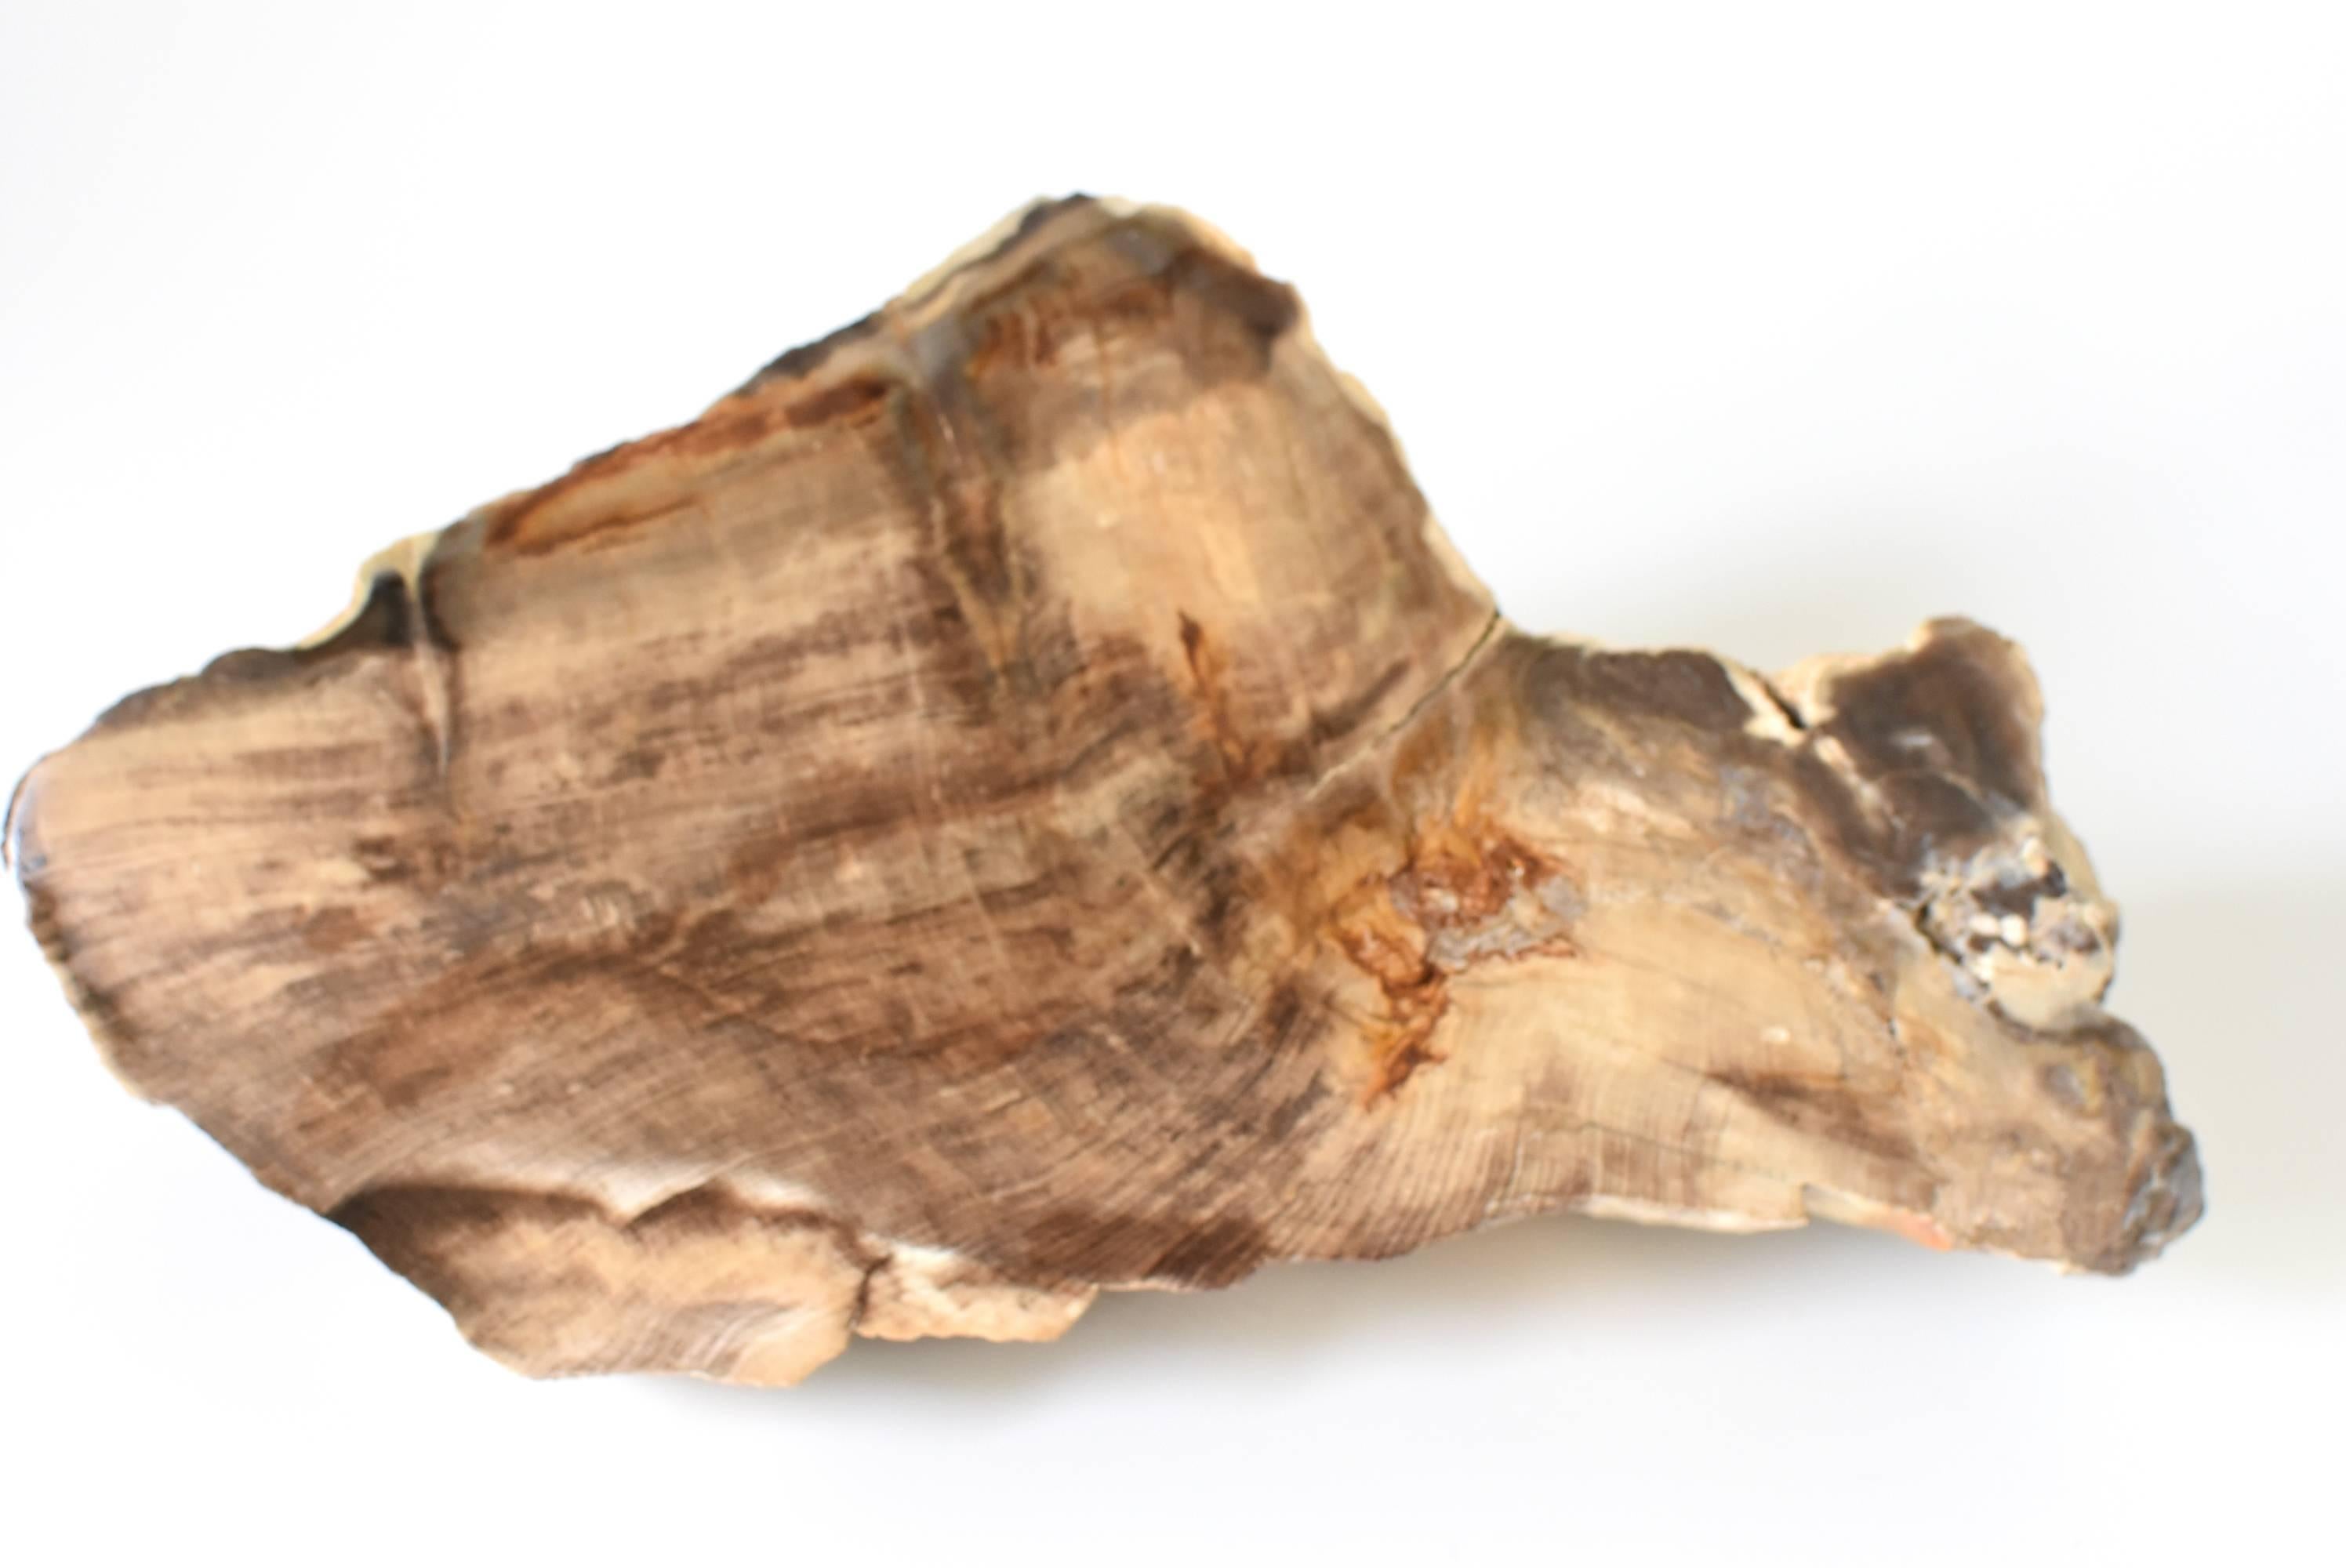 A fantastic petrified wood specimen. Original petrified bark on one side, polished interior of tree on the other. All original. 3 lb.